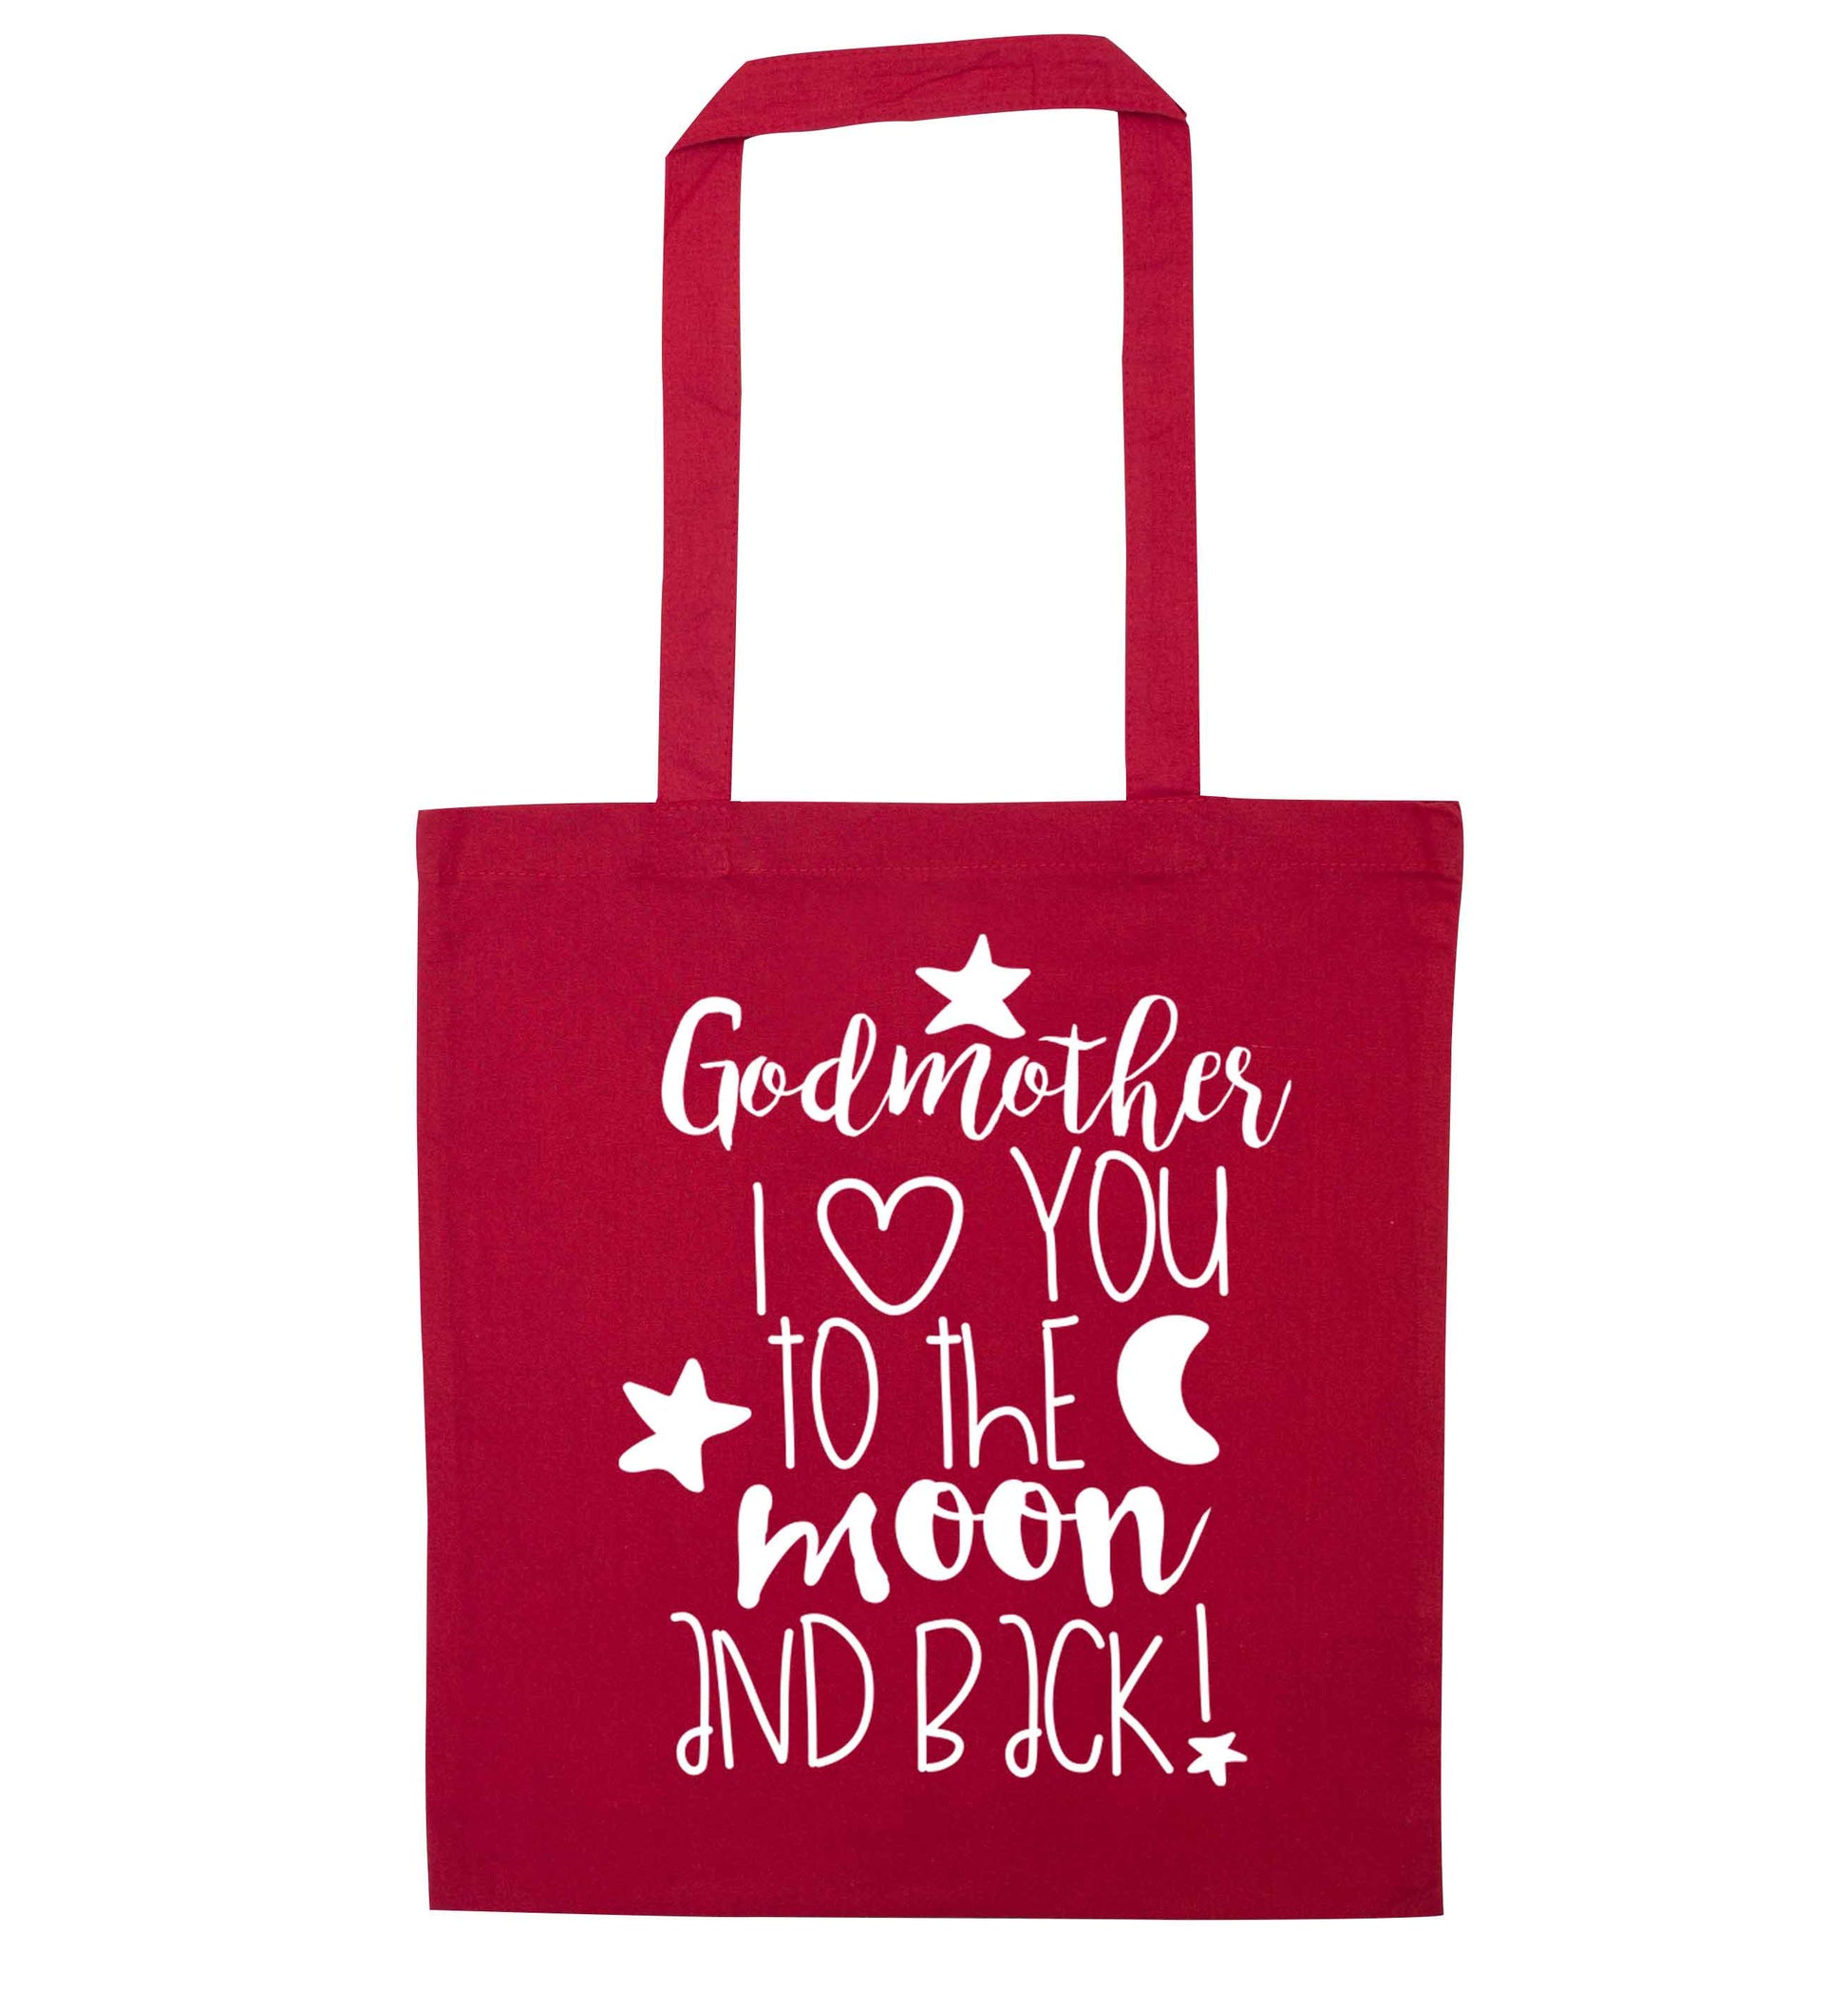 Godmother I love you to the moon and back red tote bag